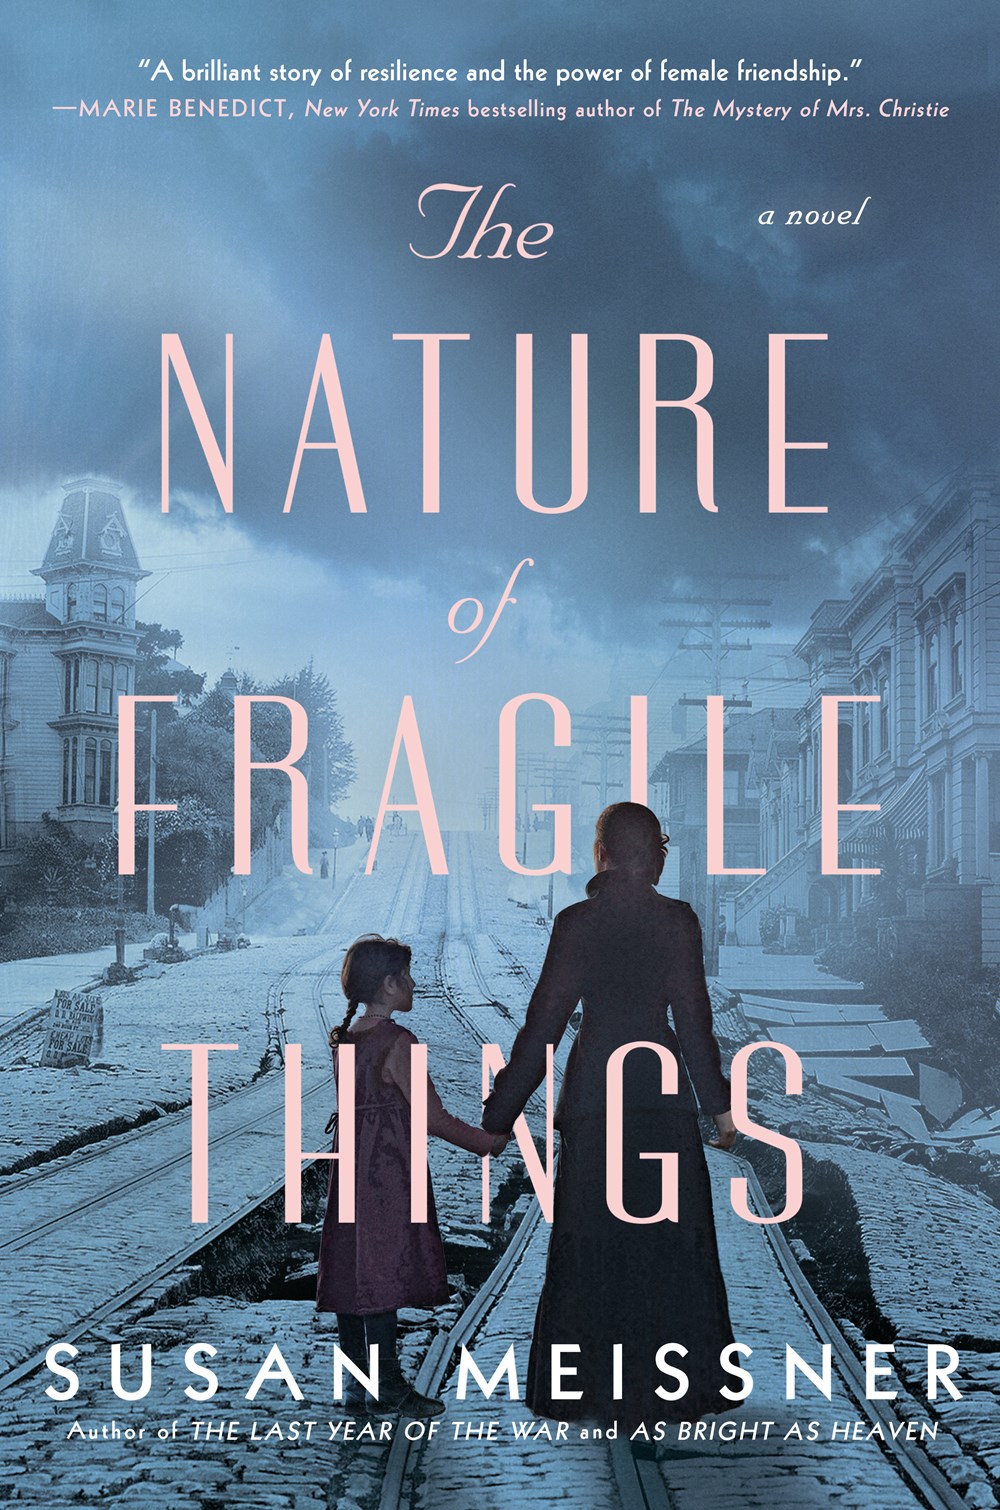 Review: The Nature of Fragile Things by Susan Meissner